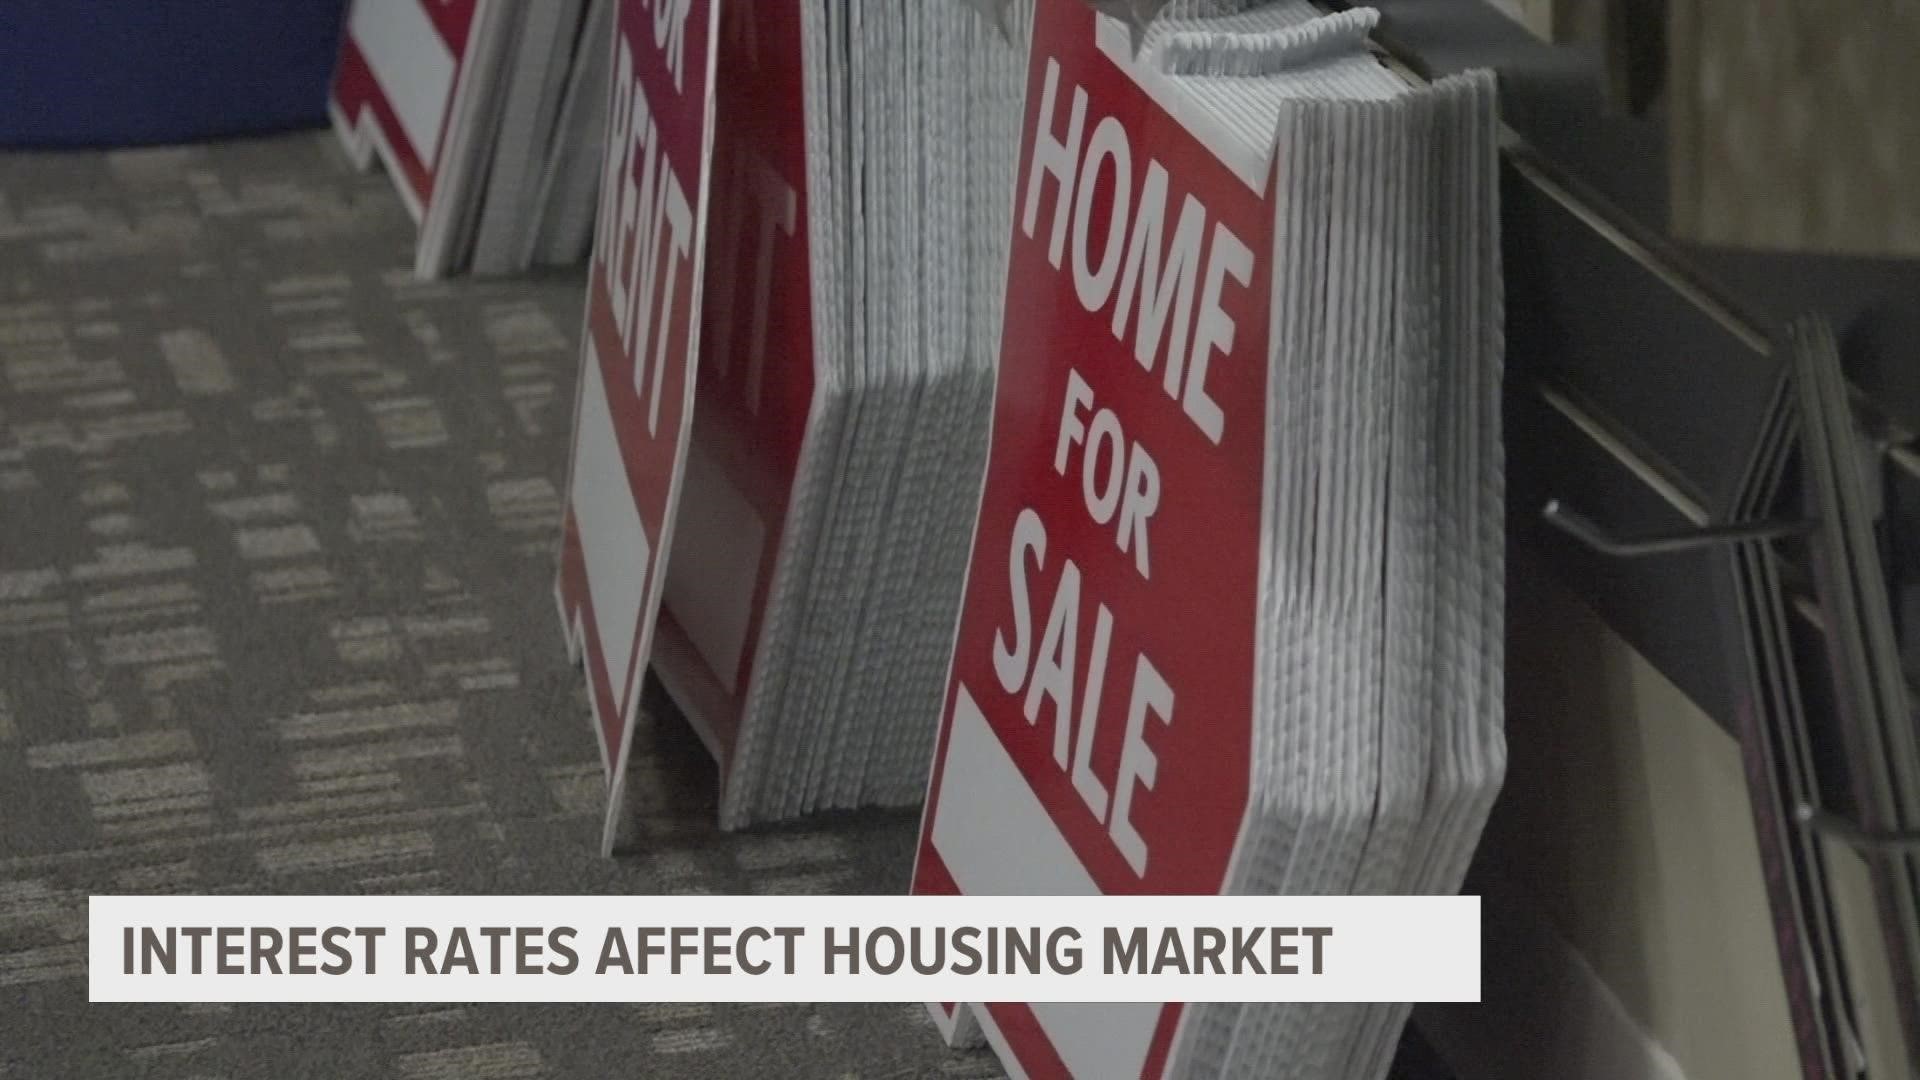 With interest rates expecting to soar across the country, many believe it can impact the housing market. Here's what it could actually look like in West Michigan.